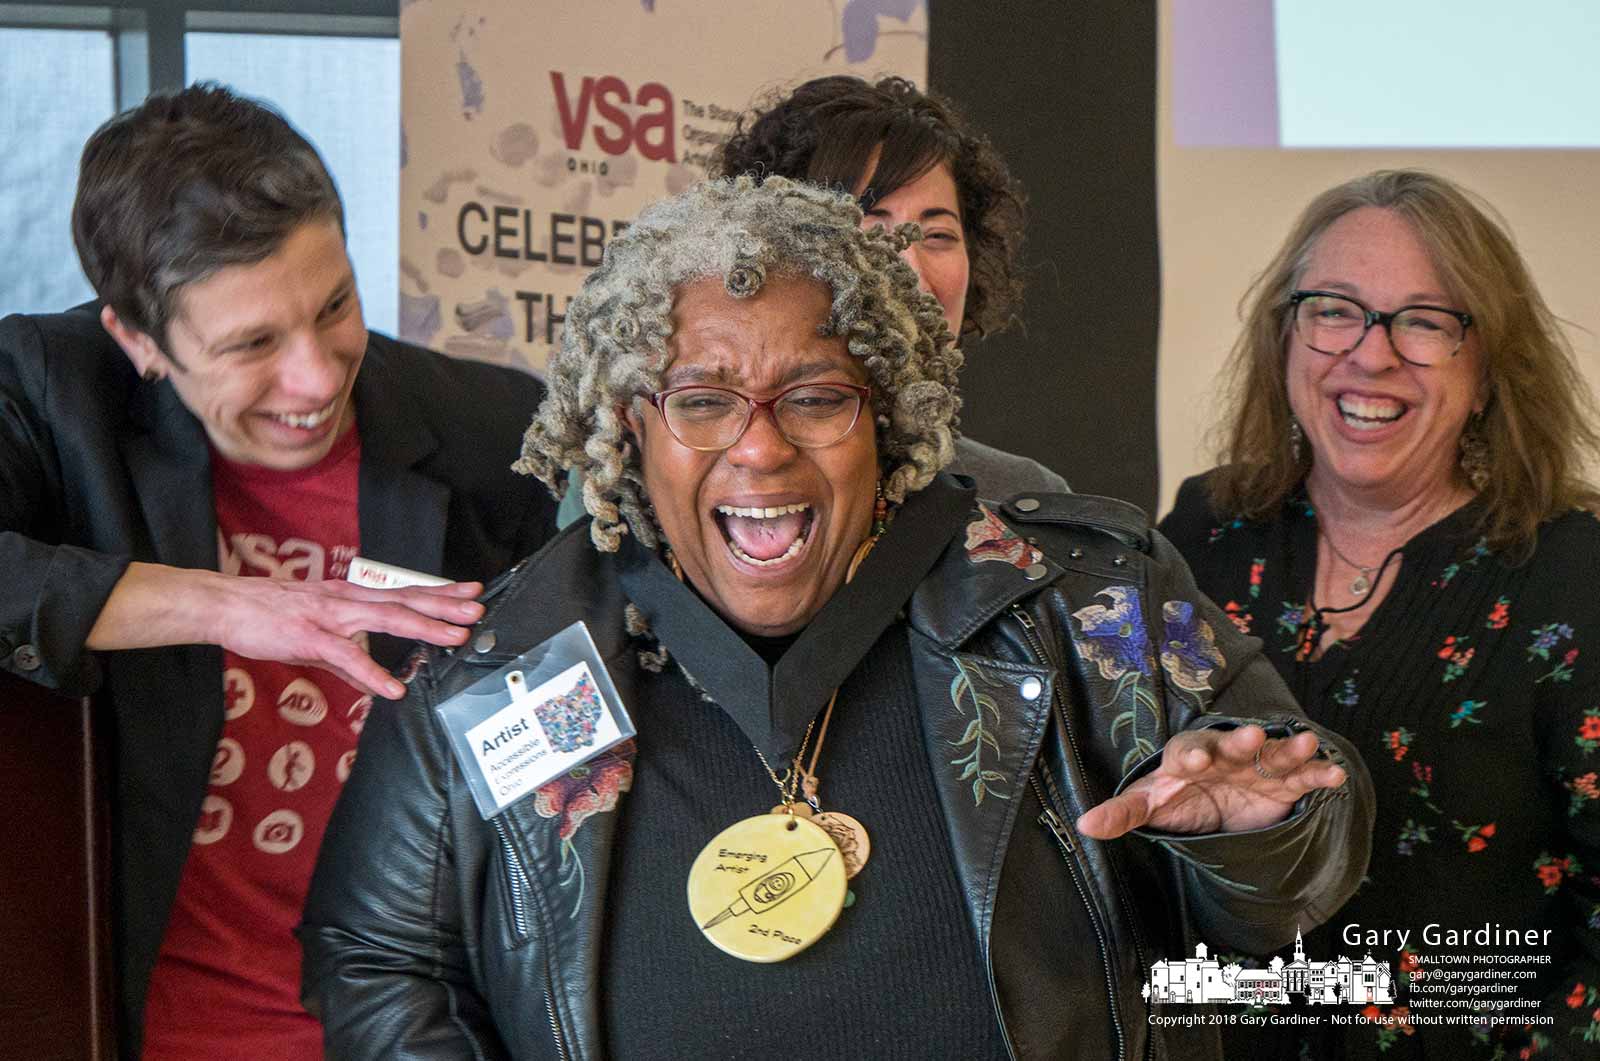 Regina Dorfmeyer expresses her joy after winning second place in the emerging artist category of the Artistic Expressions Ohio exhibit at the Community Center sponsored by VSA Ohio. My Final Photo for March 24, 2018.